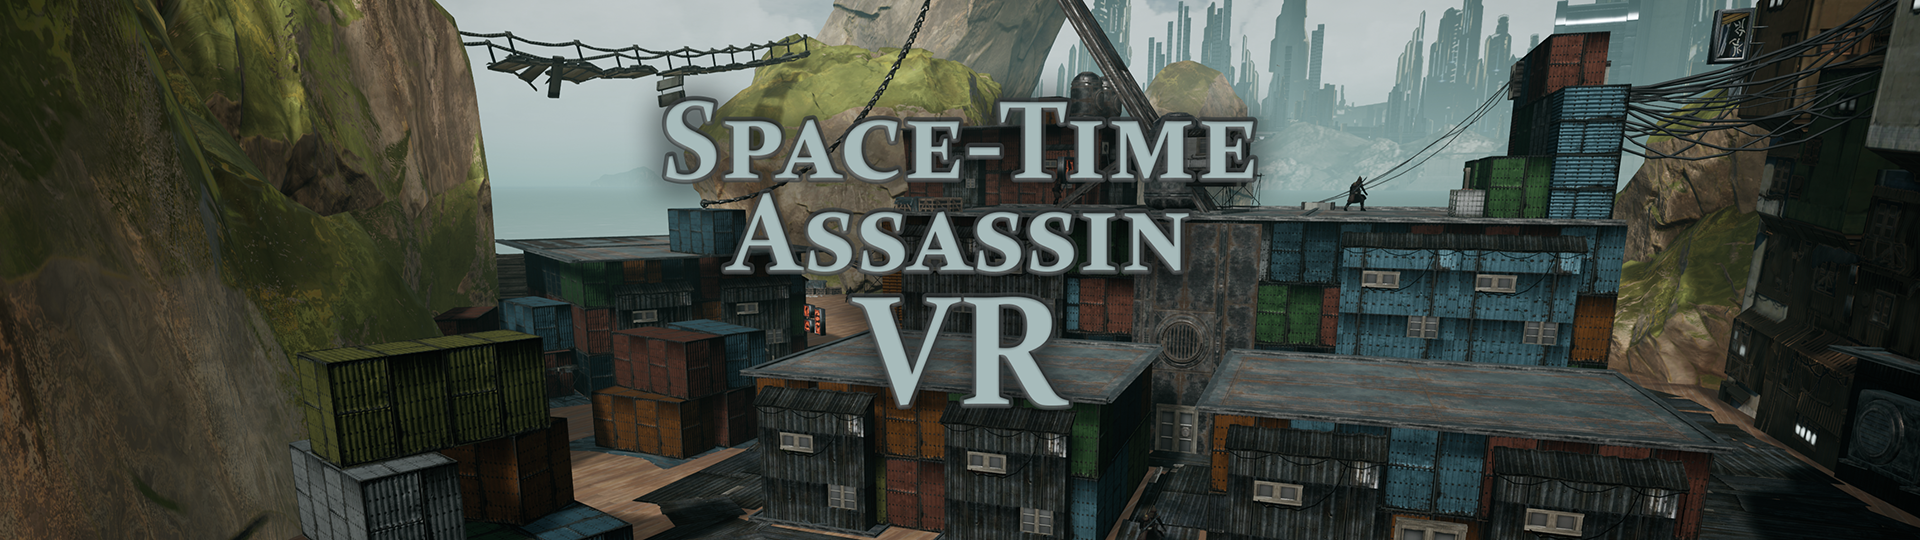 Space-Time Assassin VR